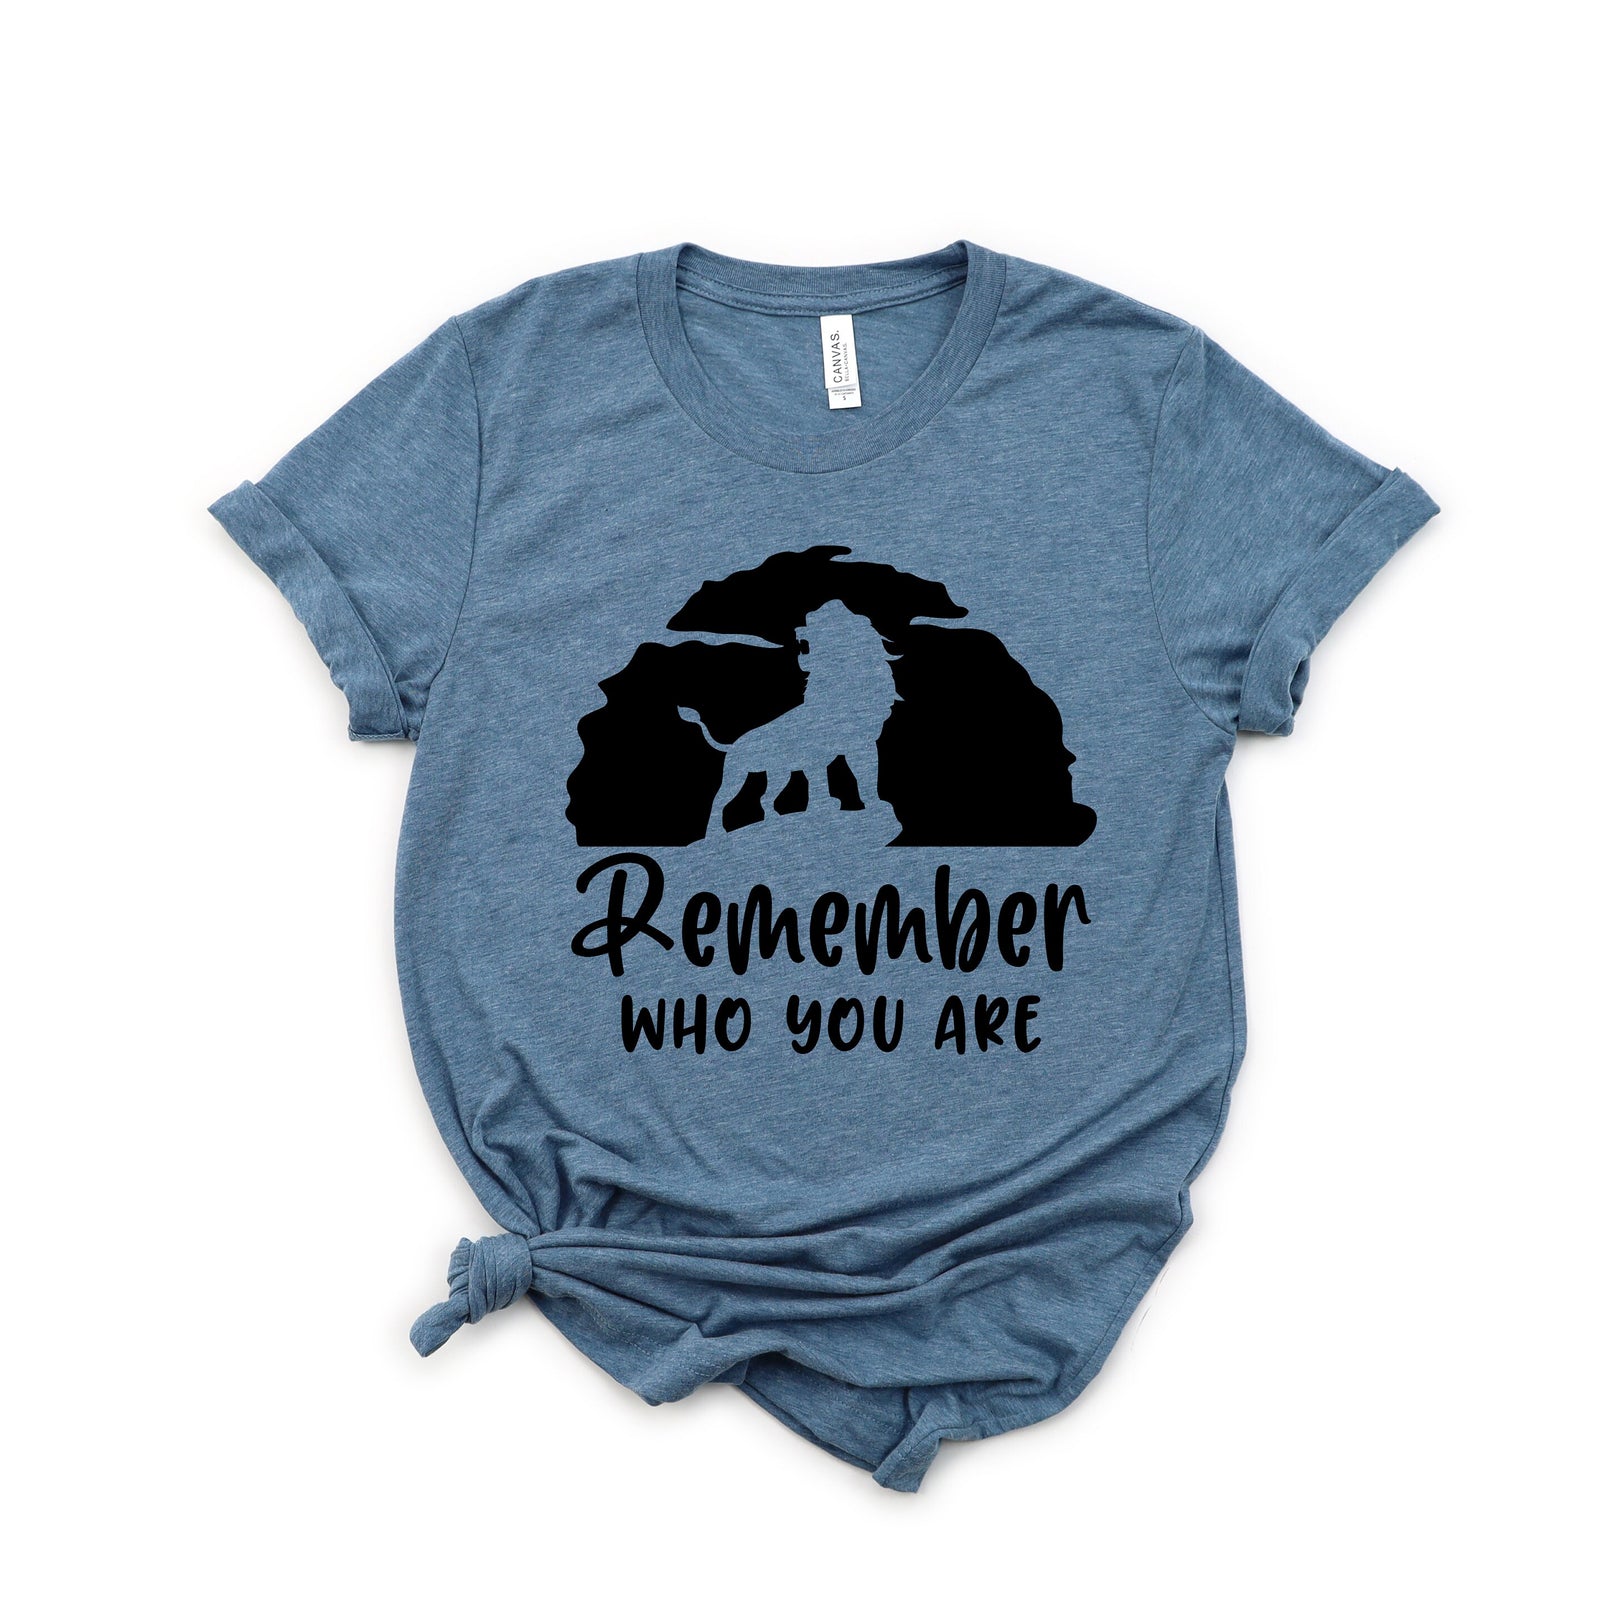 Remember Who You Are - Lion King - Simba - Mufasa - Disney Character Unisex Adult Shirt